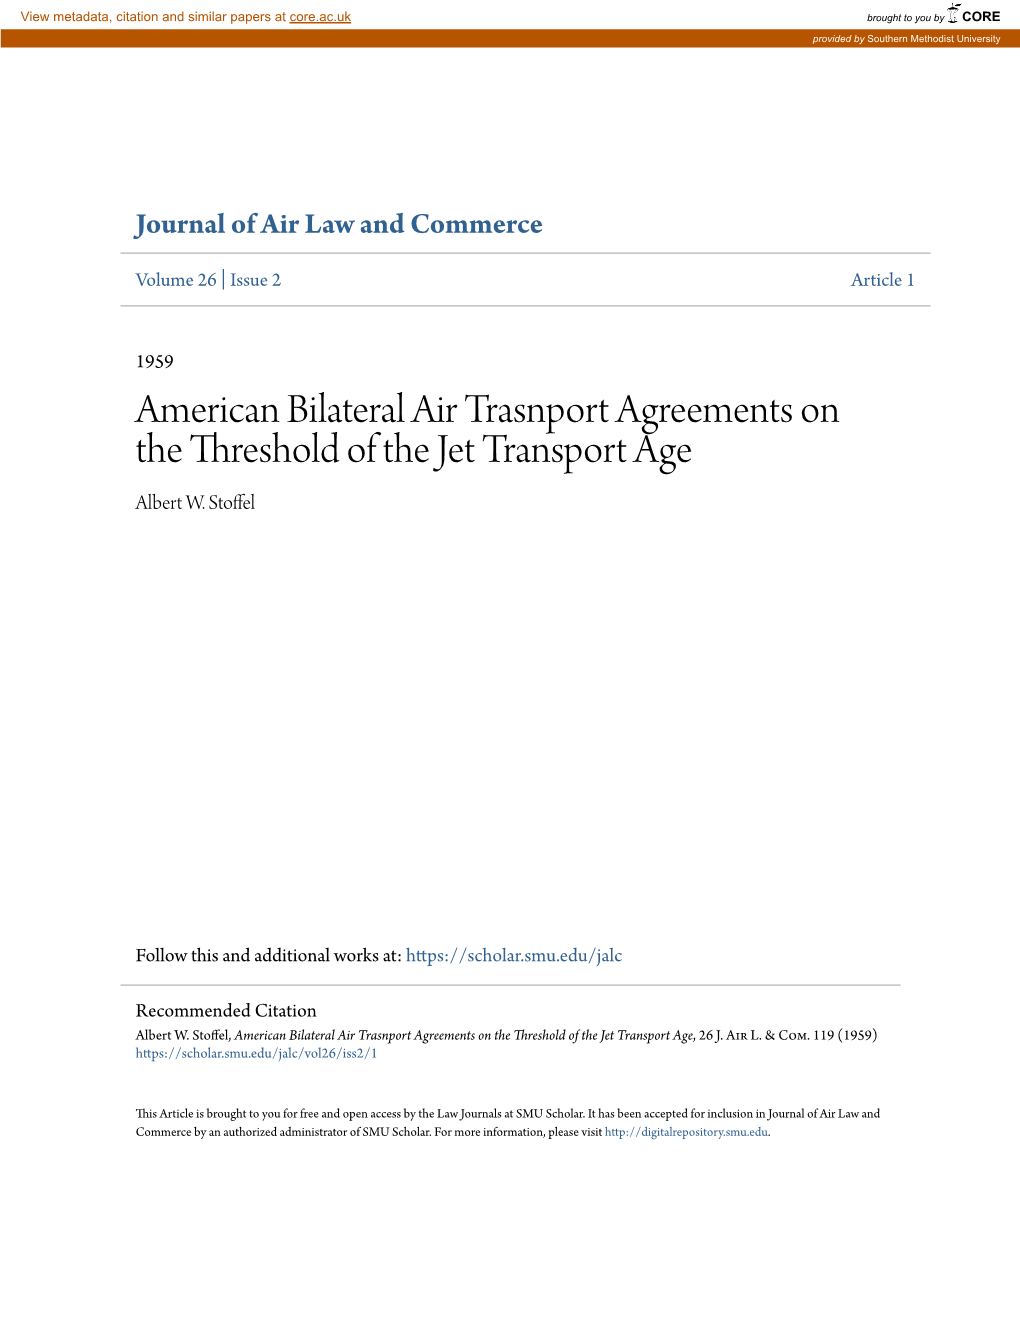 American Bilateral Air Trasnport Agreements on the Threshold of the Jet Transport Age Albert W